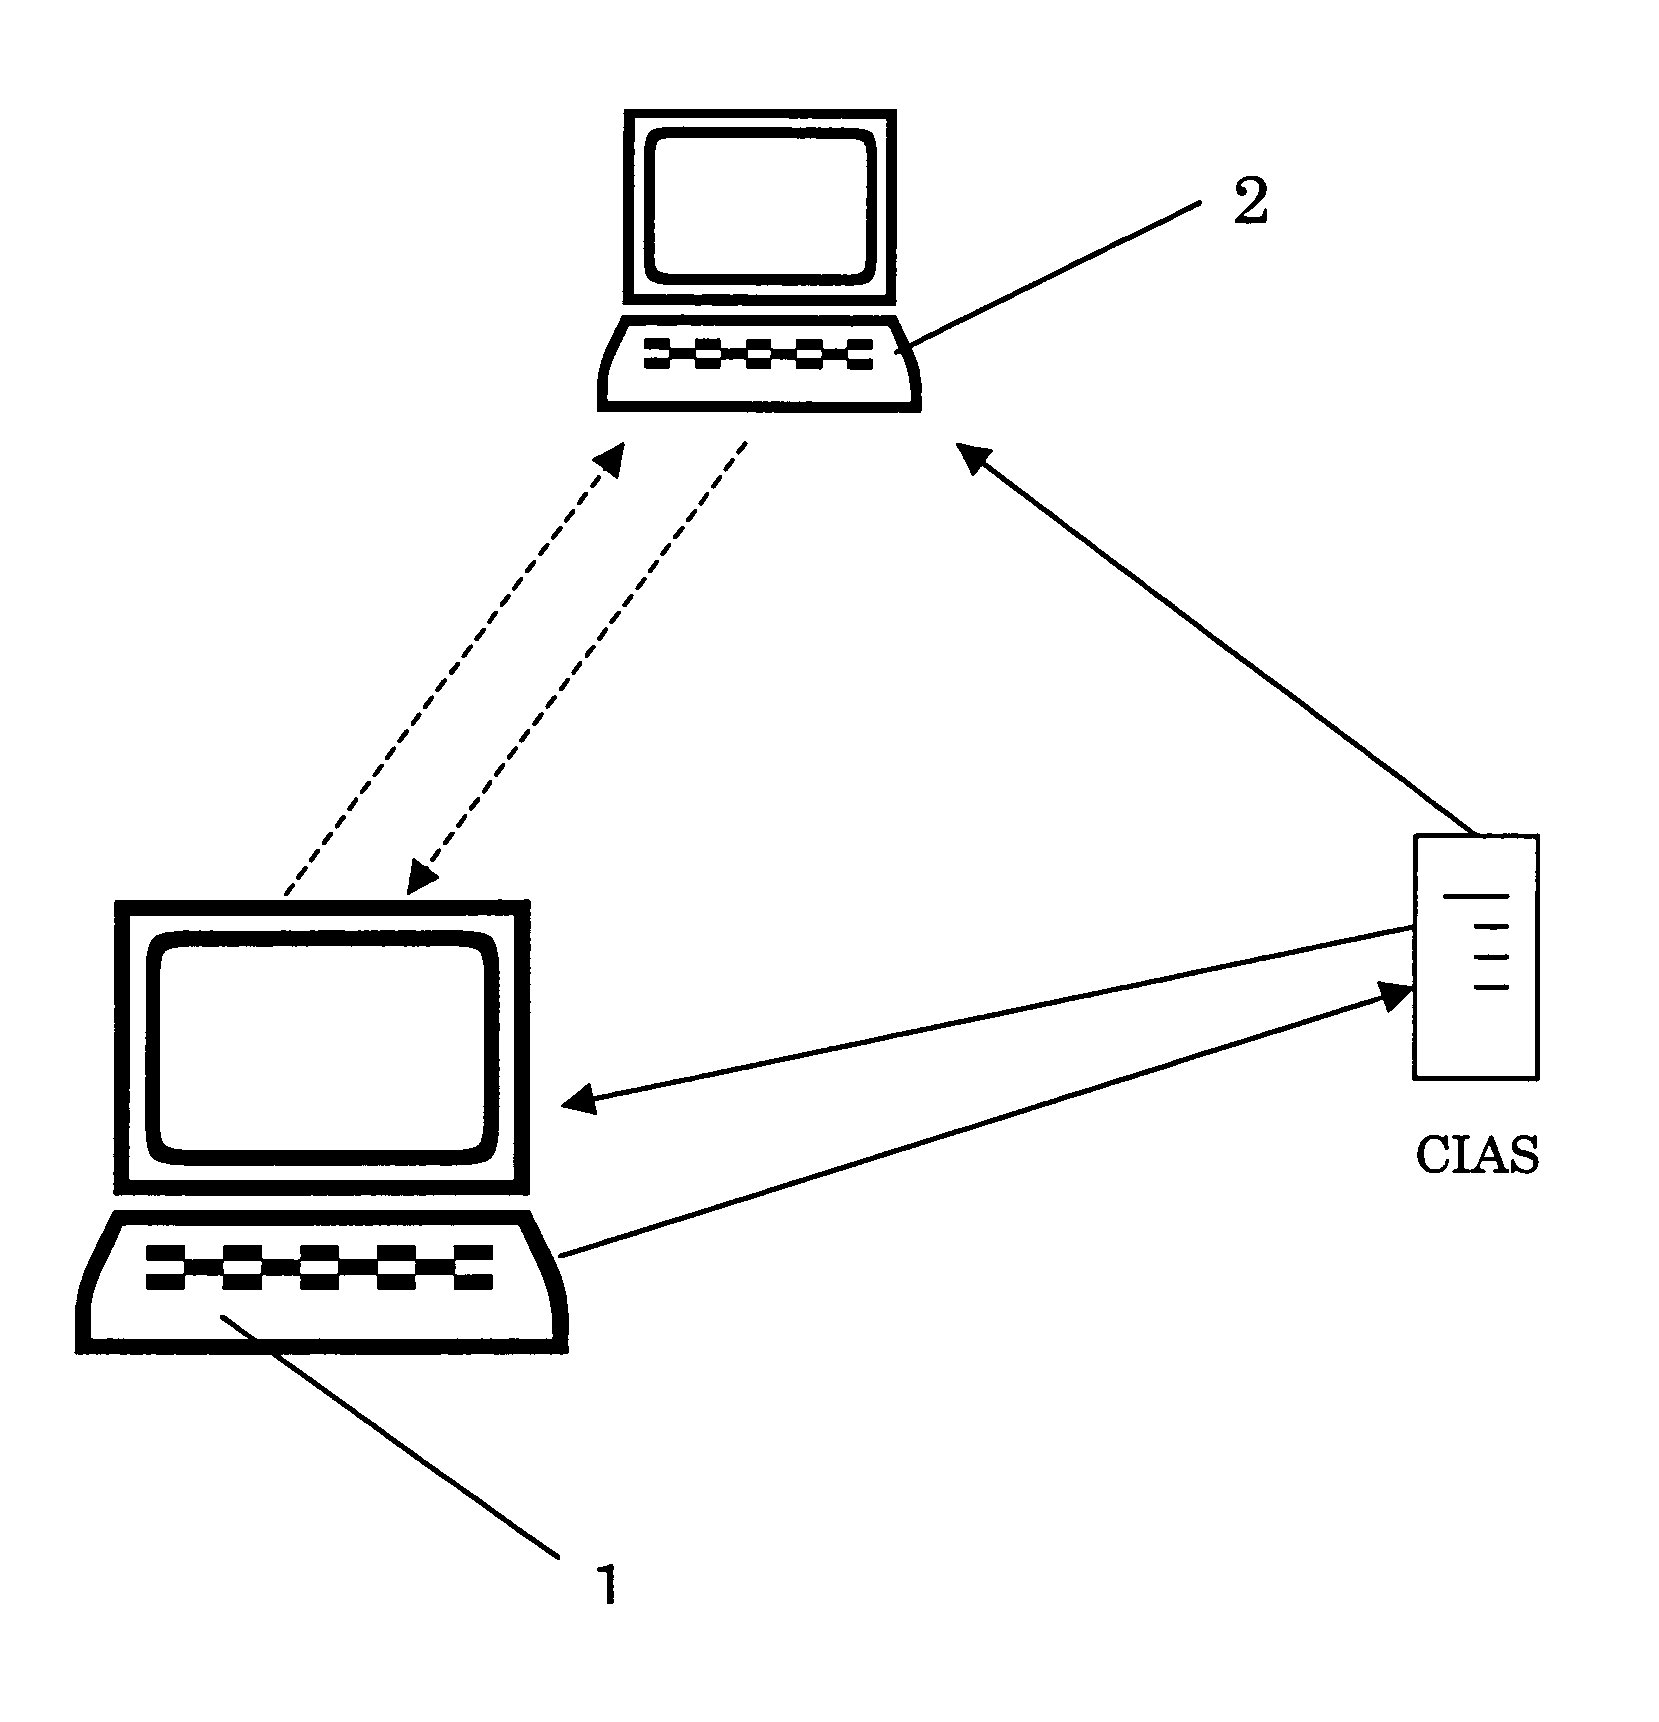 Electronic currency, electronic wallet therefor and electronic payment systems employing them